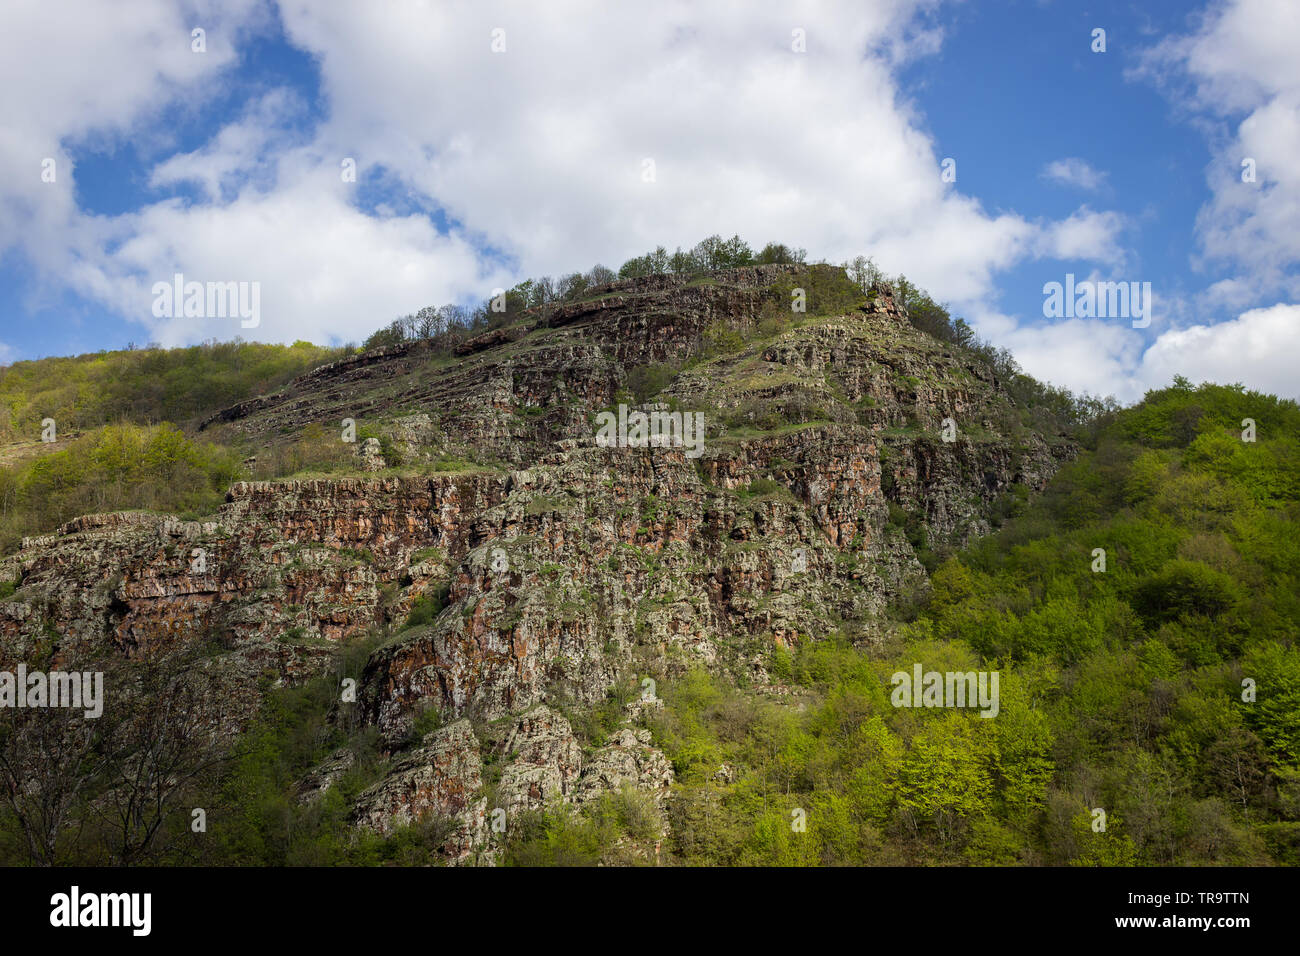 Impressive, red, rocky peak on Old mountain (Stara planina) in Serbia, covered by vivid green, sunlit trees and bushes during early spring Stock Photo